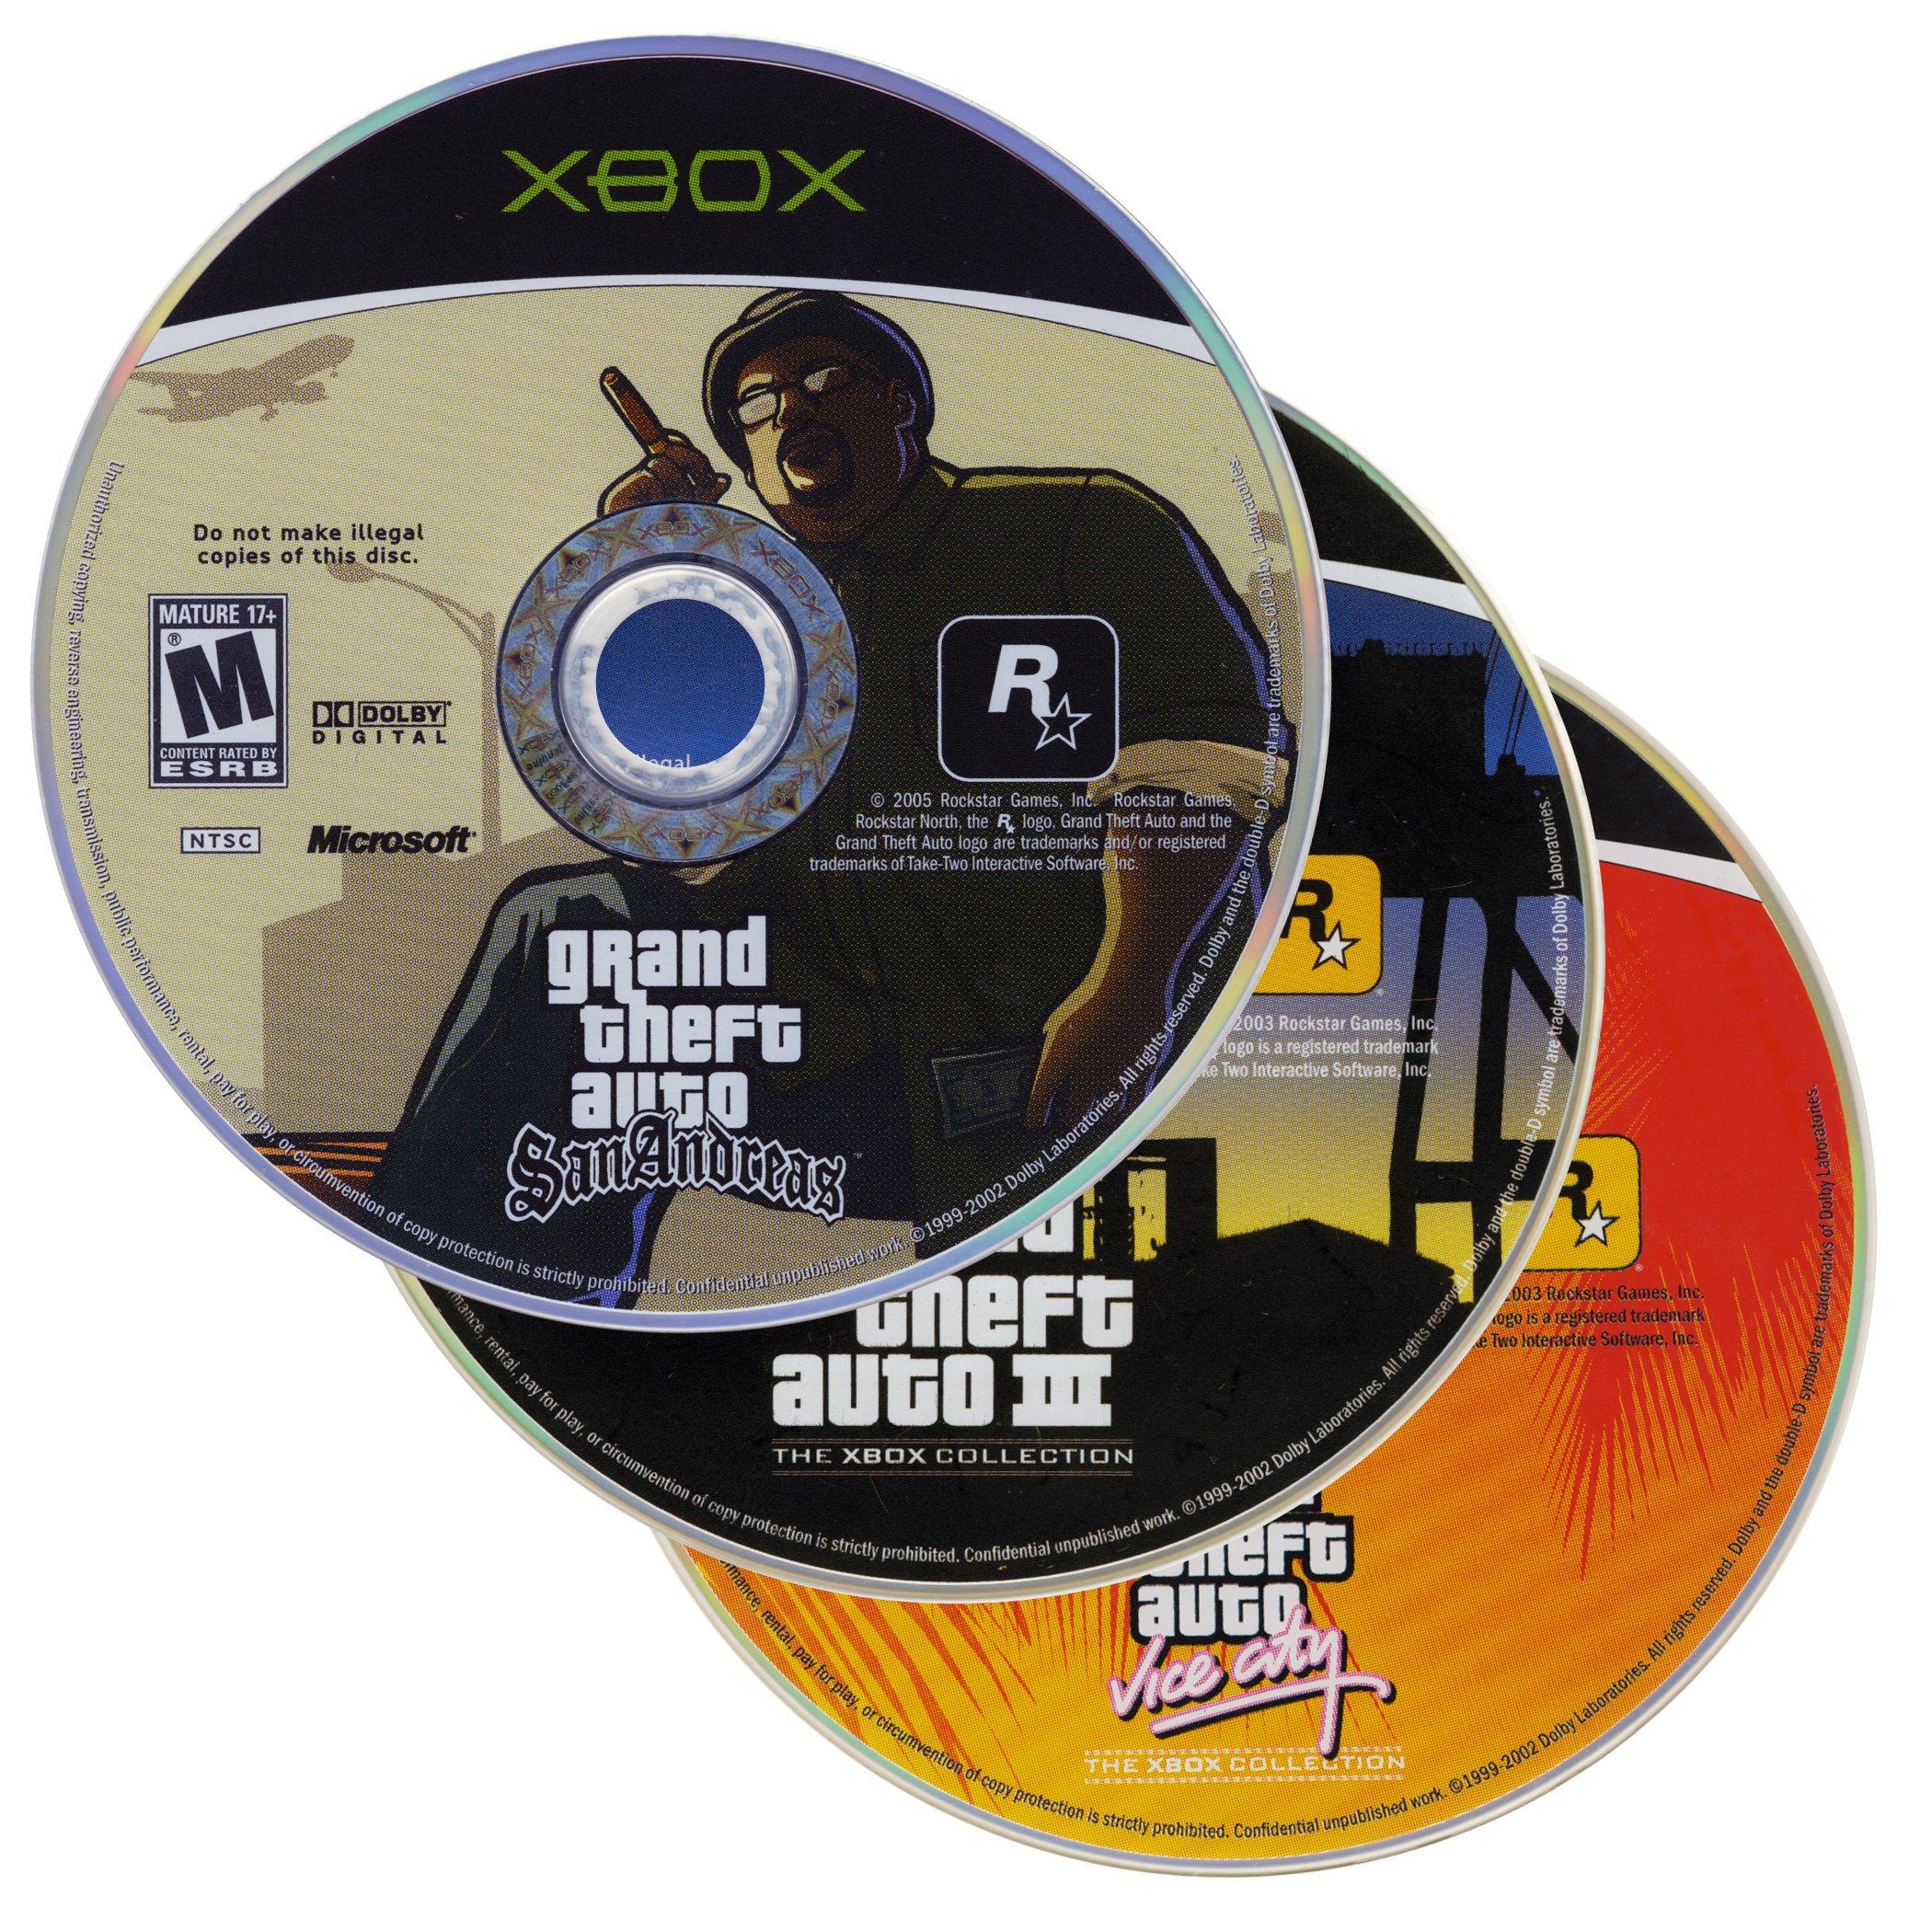 Grand Theft Auto Xbox 360 Games - Choose Your Game - Complete Collection